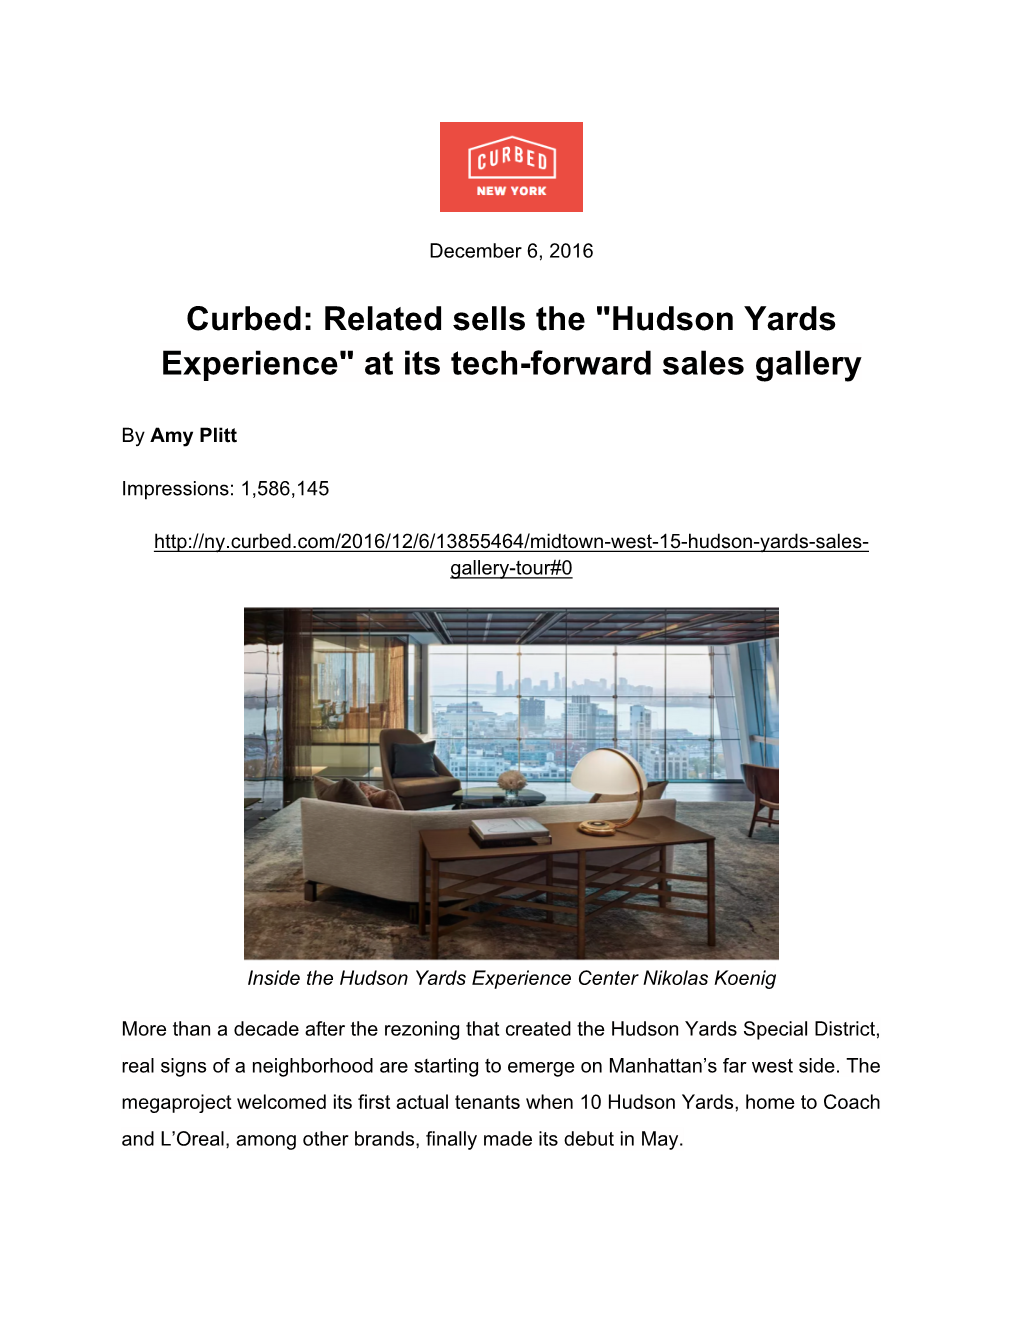 Curbed: Related Sells the "Hudson Yards Experience" at Its Tech-Forward Sales Gallery